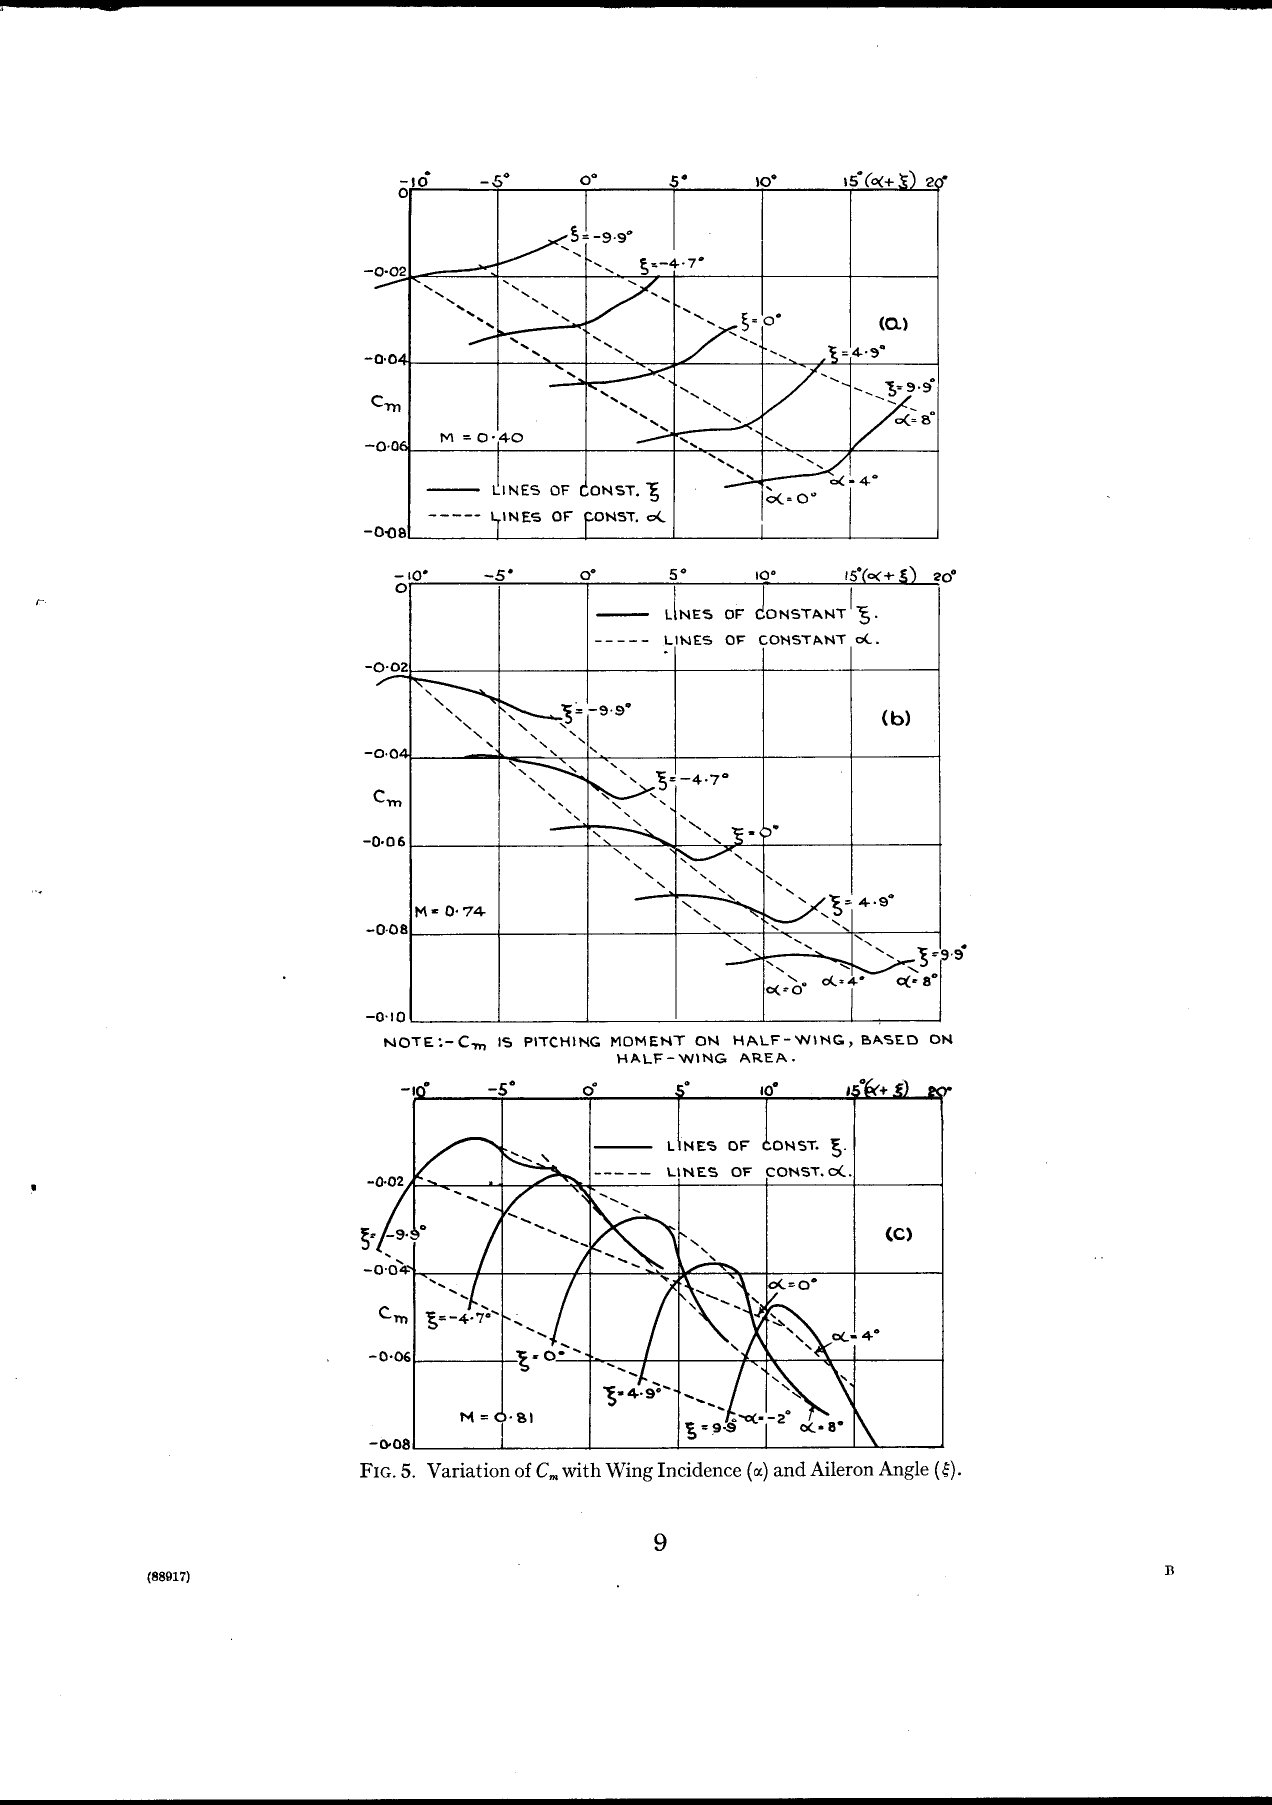 Sample page 9 from AirCorps Library document: Flight Measurements - Aileron Deflection - P-51